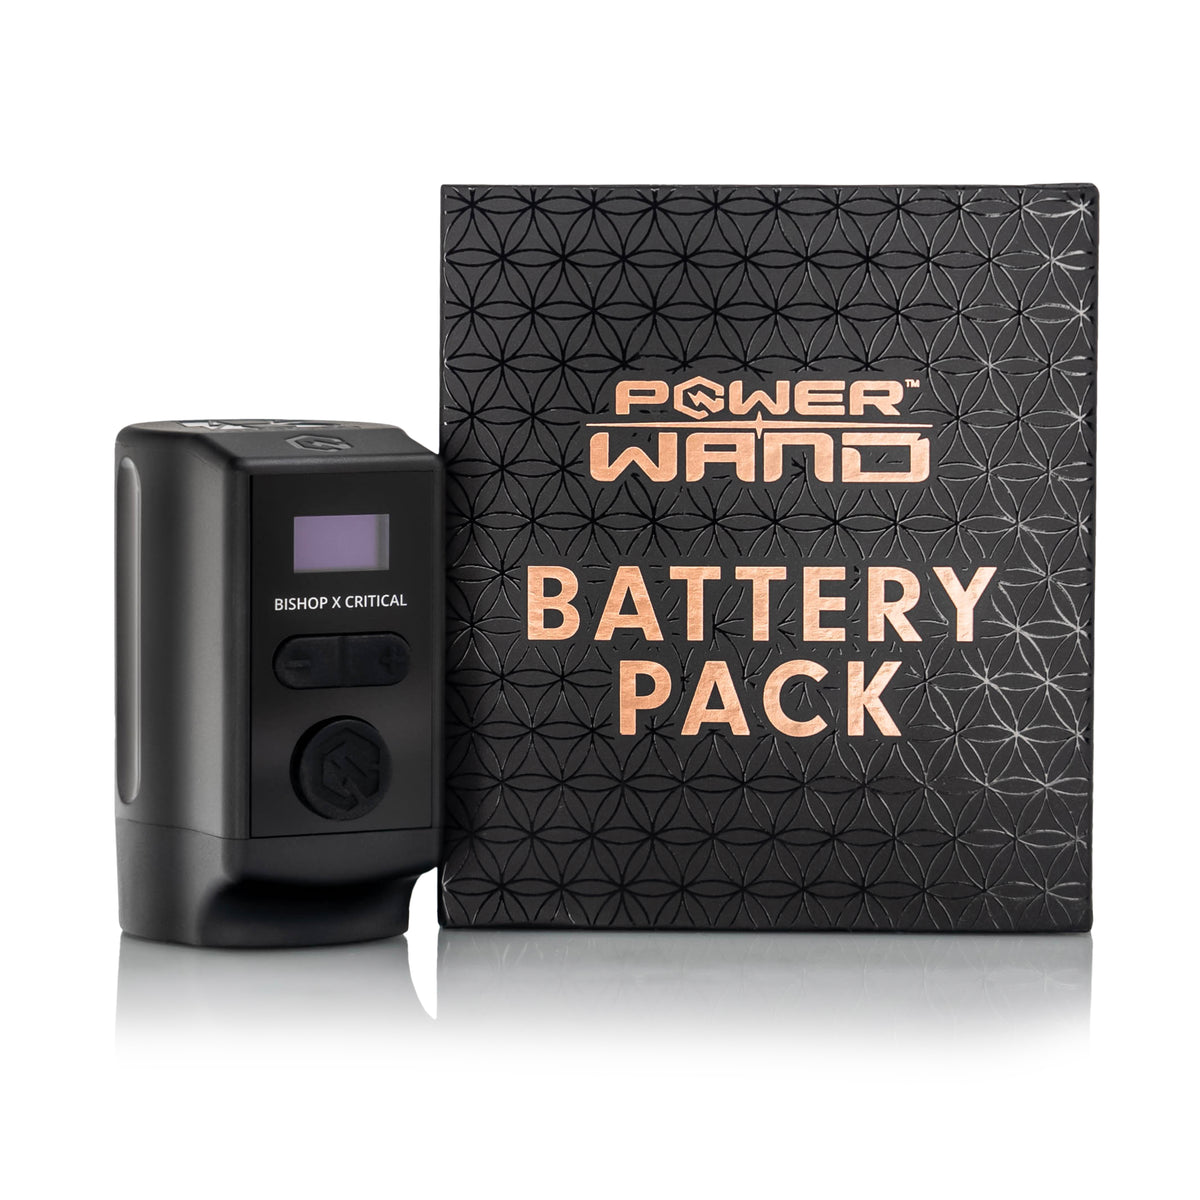 Bishop x Critical Power Wand Battery Pack